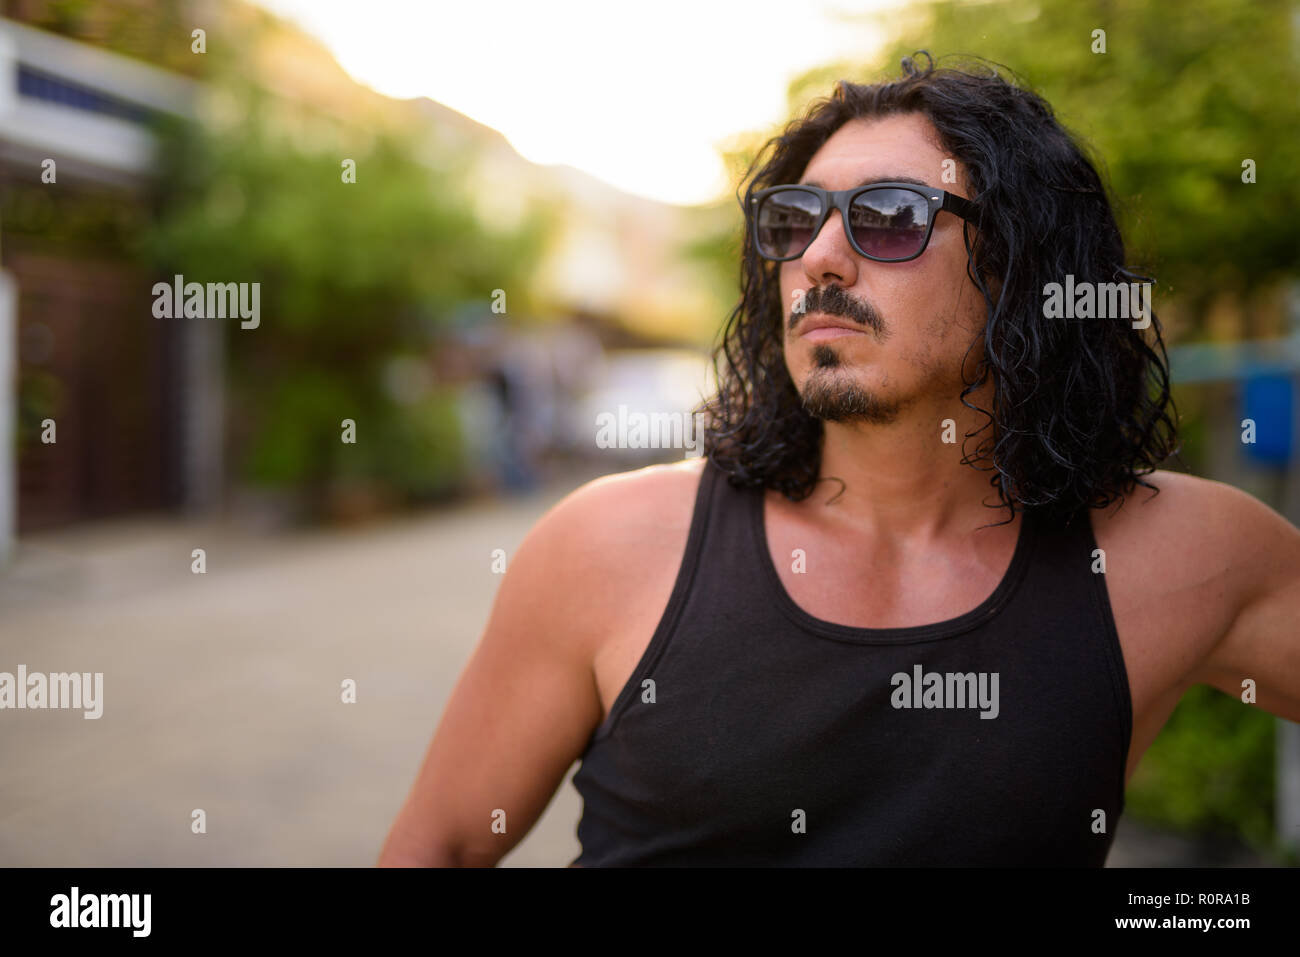 Handsome man with curly hair and mustache in the streets outdoor Stock Photo